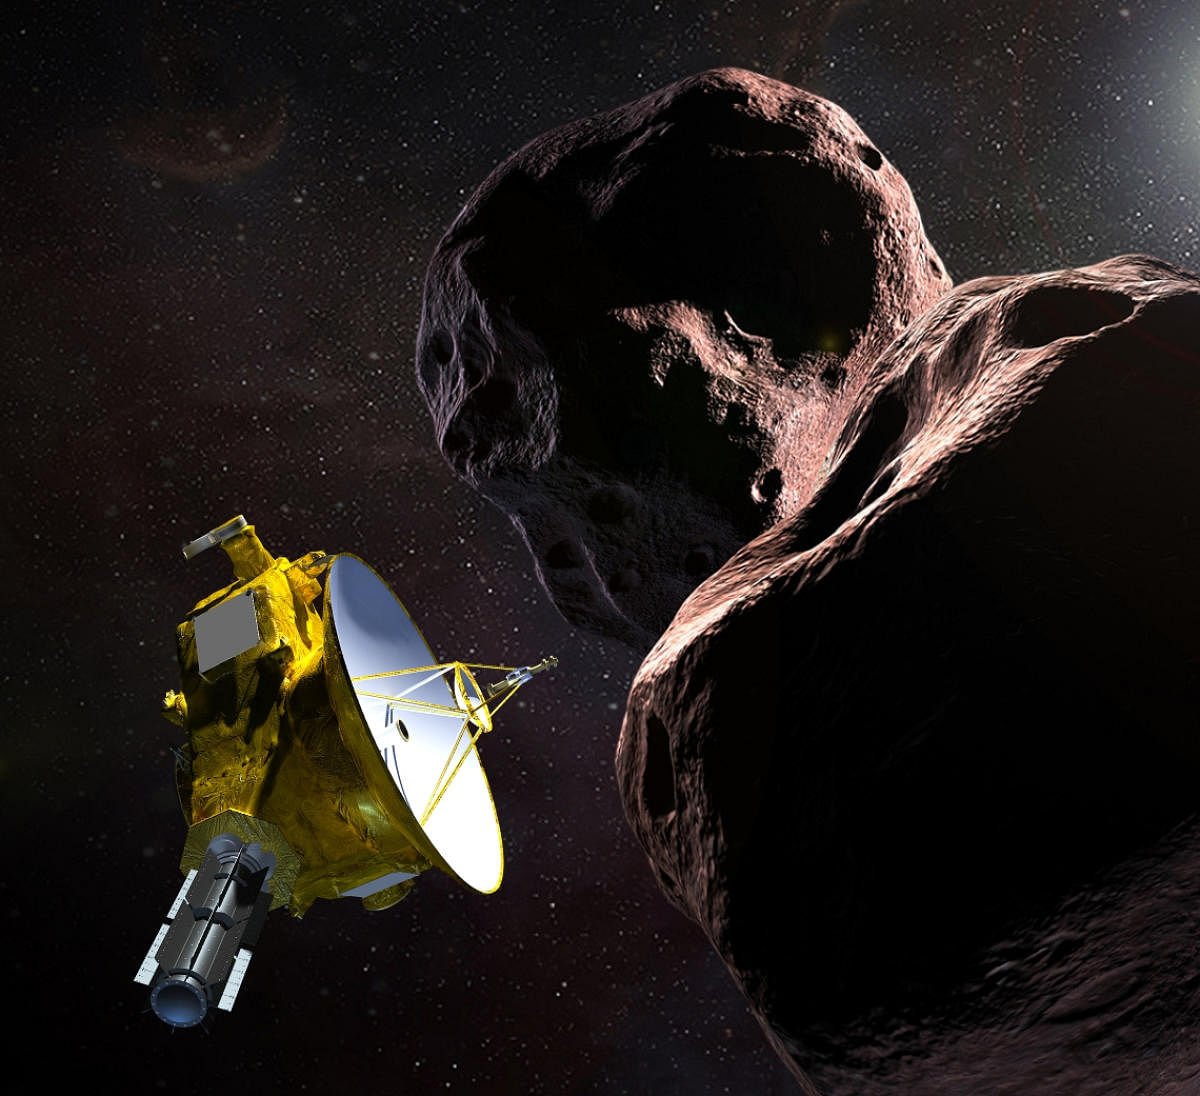 The US space agency will ring in the New Year with a live online broadcast to mark historic flyby of the mysterious object in a dark and frigid region of space known as the Kuiper Belt at 12:33 am January 1 (local time).